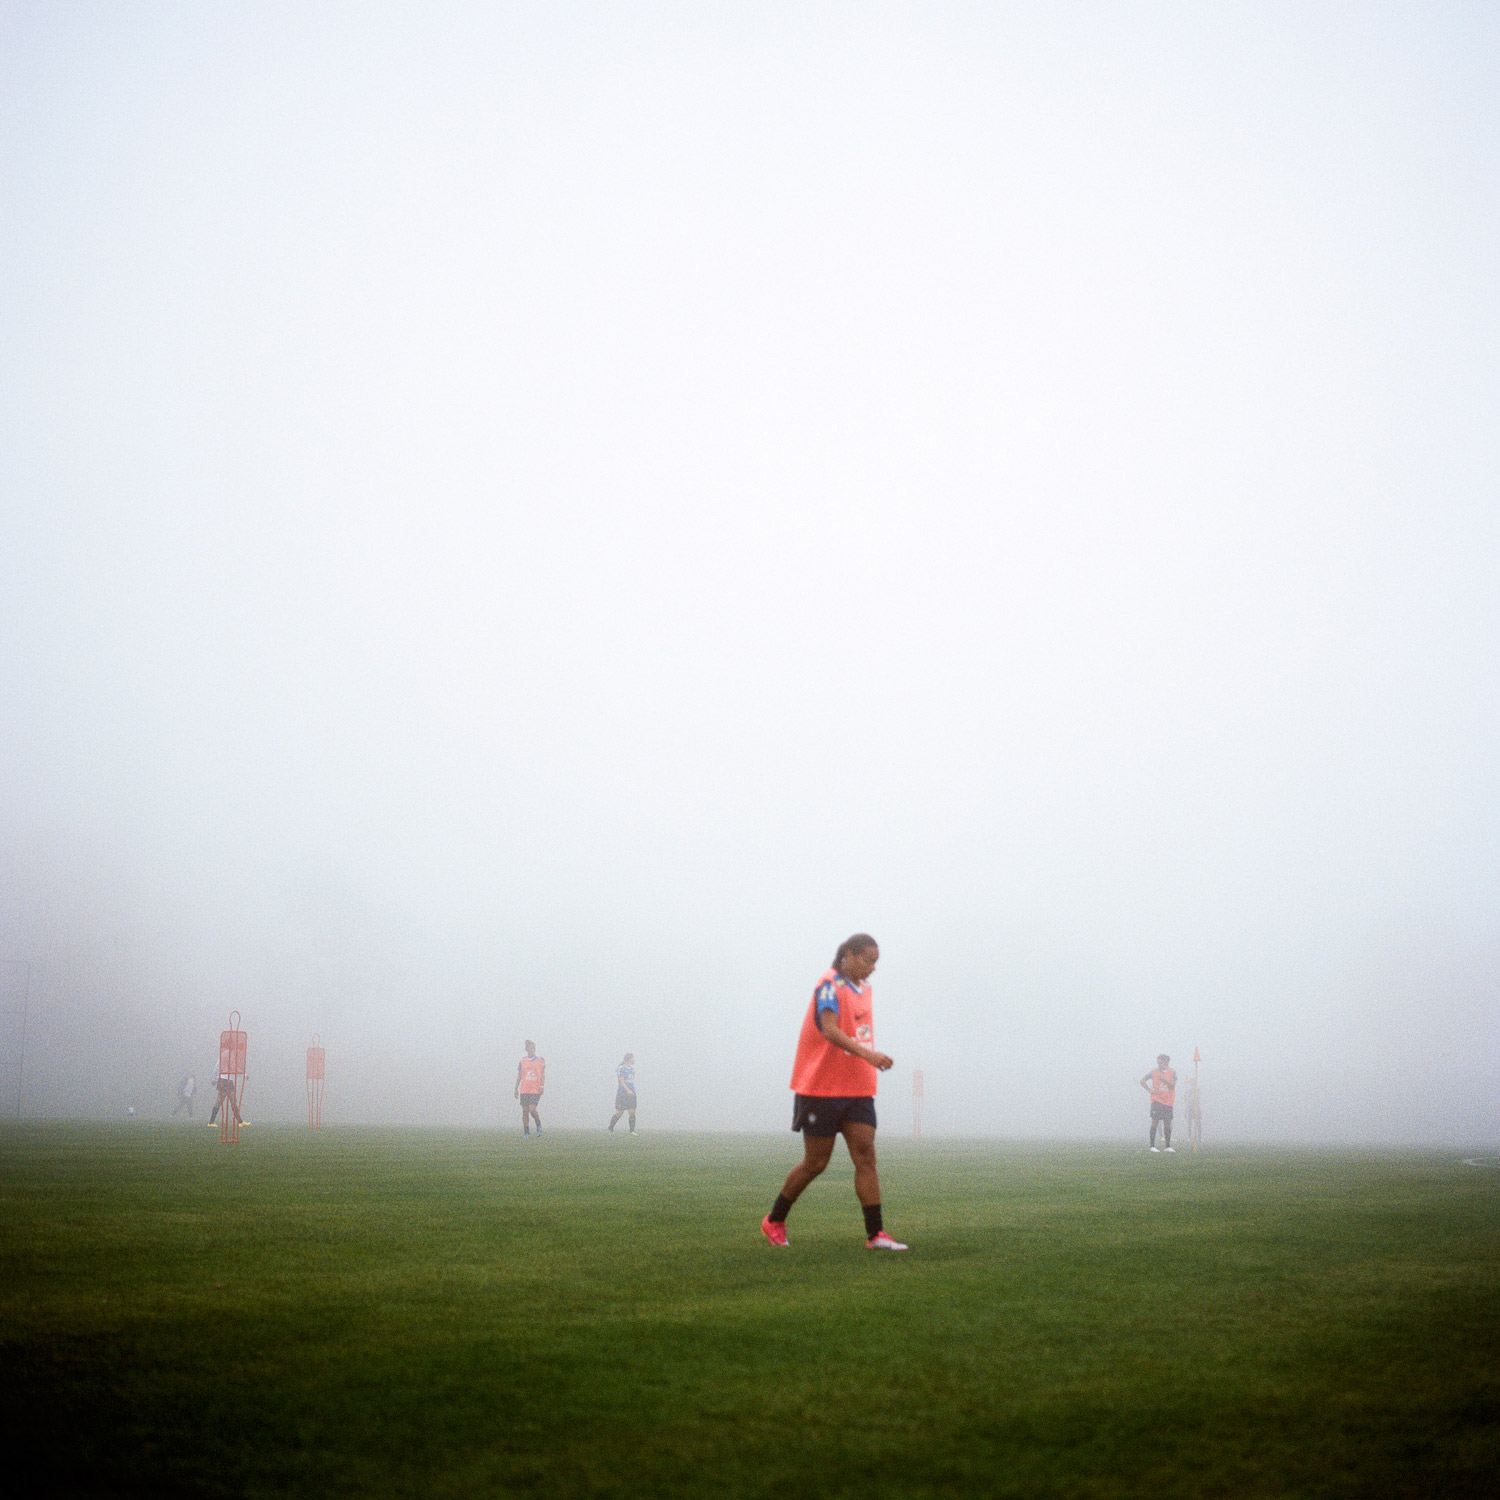 A Brazilian Women’s National team player walks between drills on a foggy afternoon training session at the Granja Comary in Teresópolis, Brazil. (October 25, 2010)